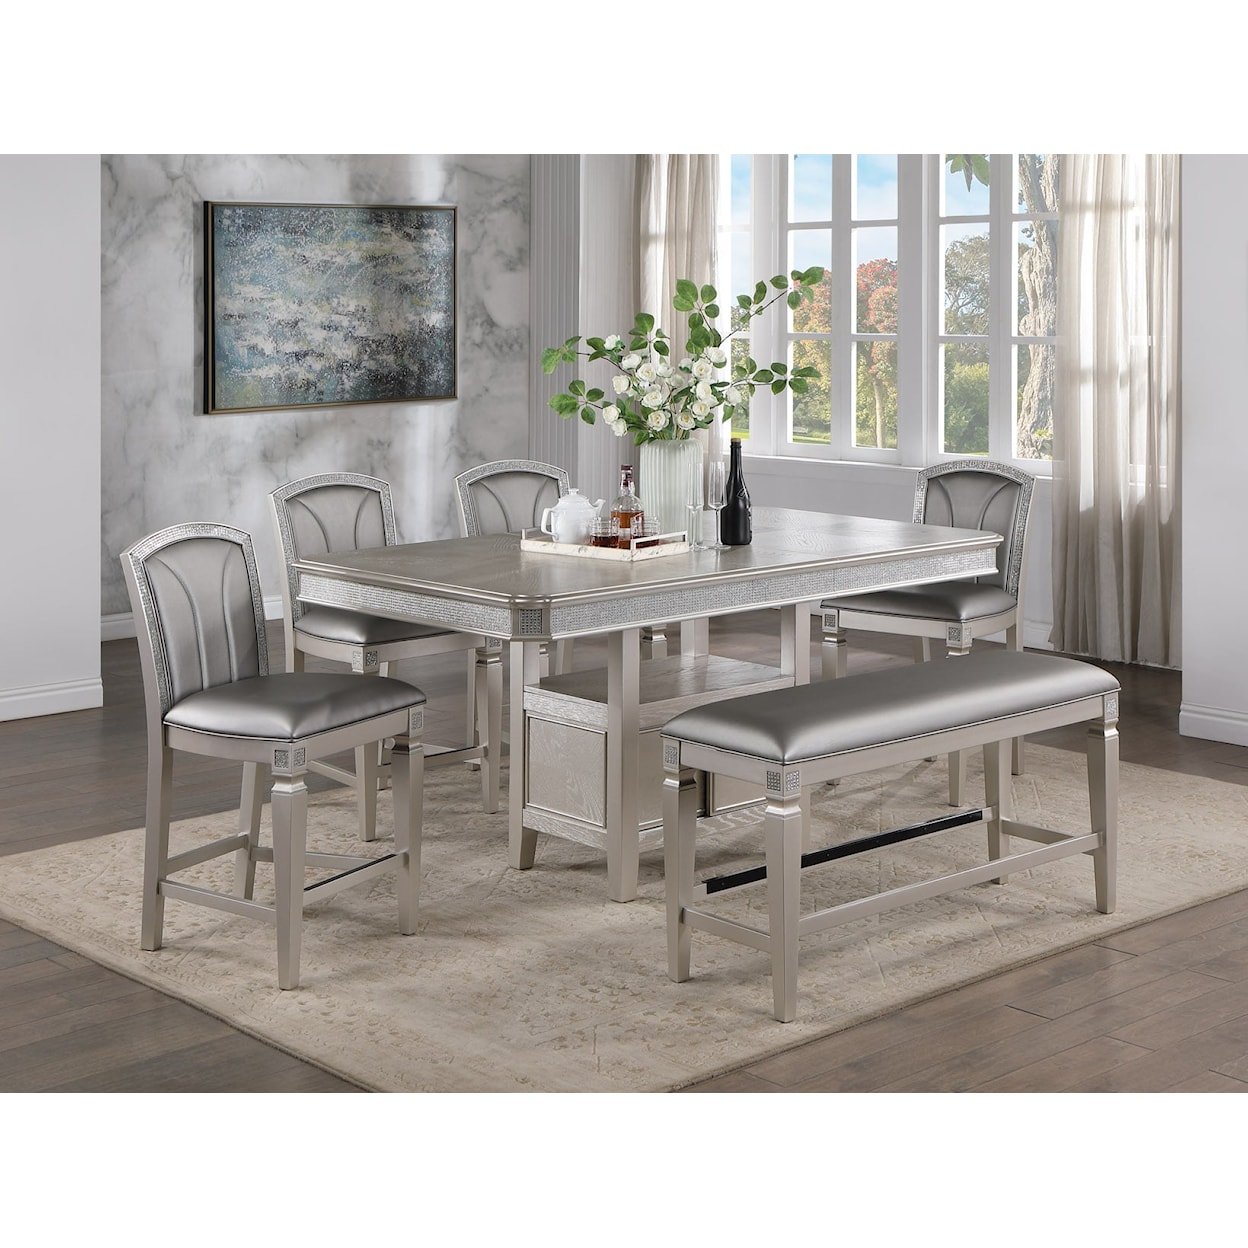 CM Klina Counter-Height Dining Table